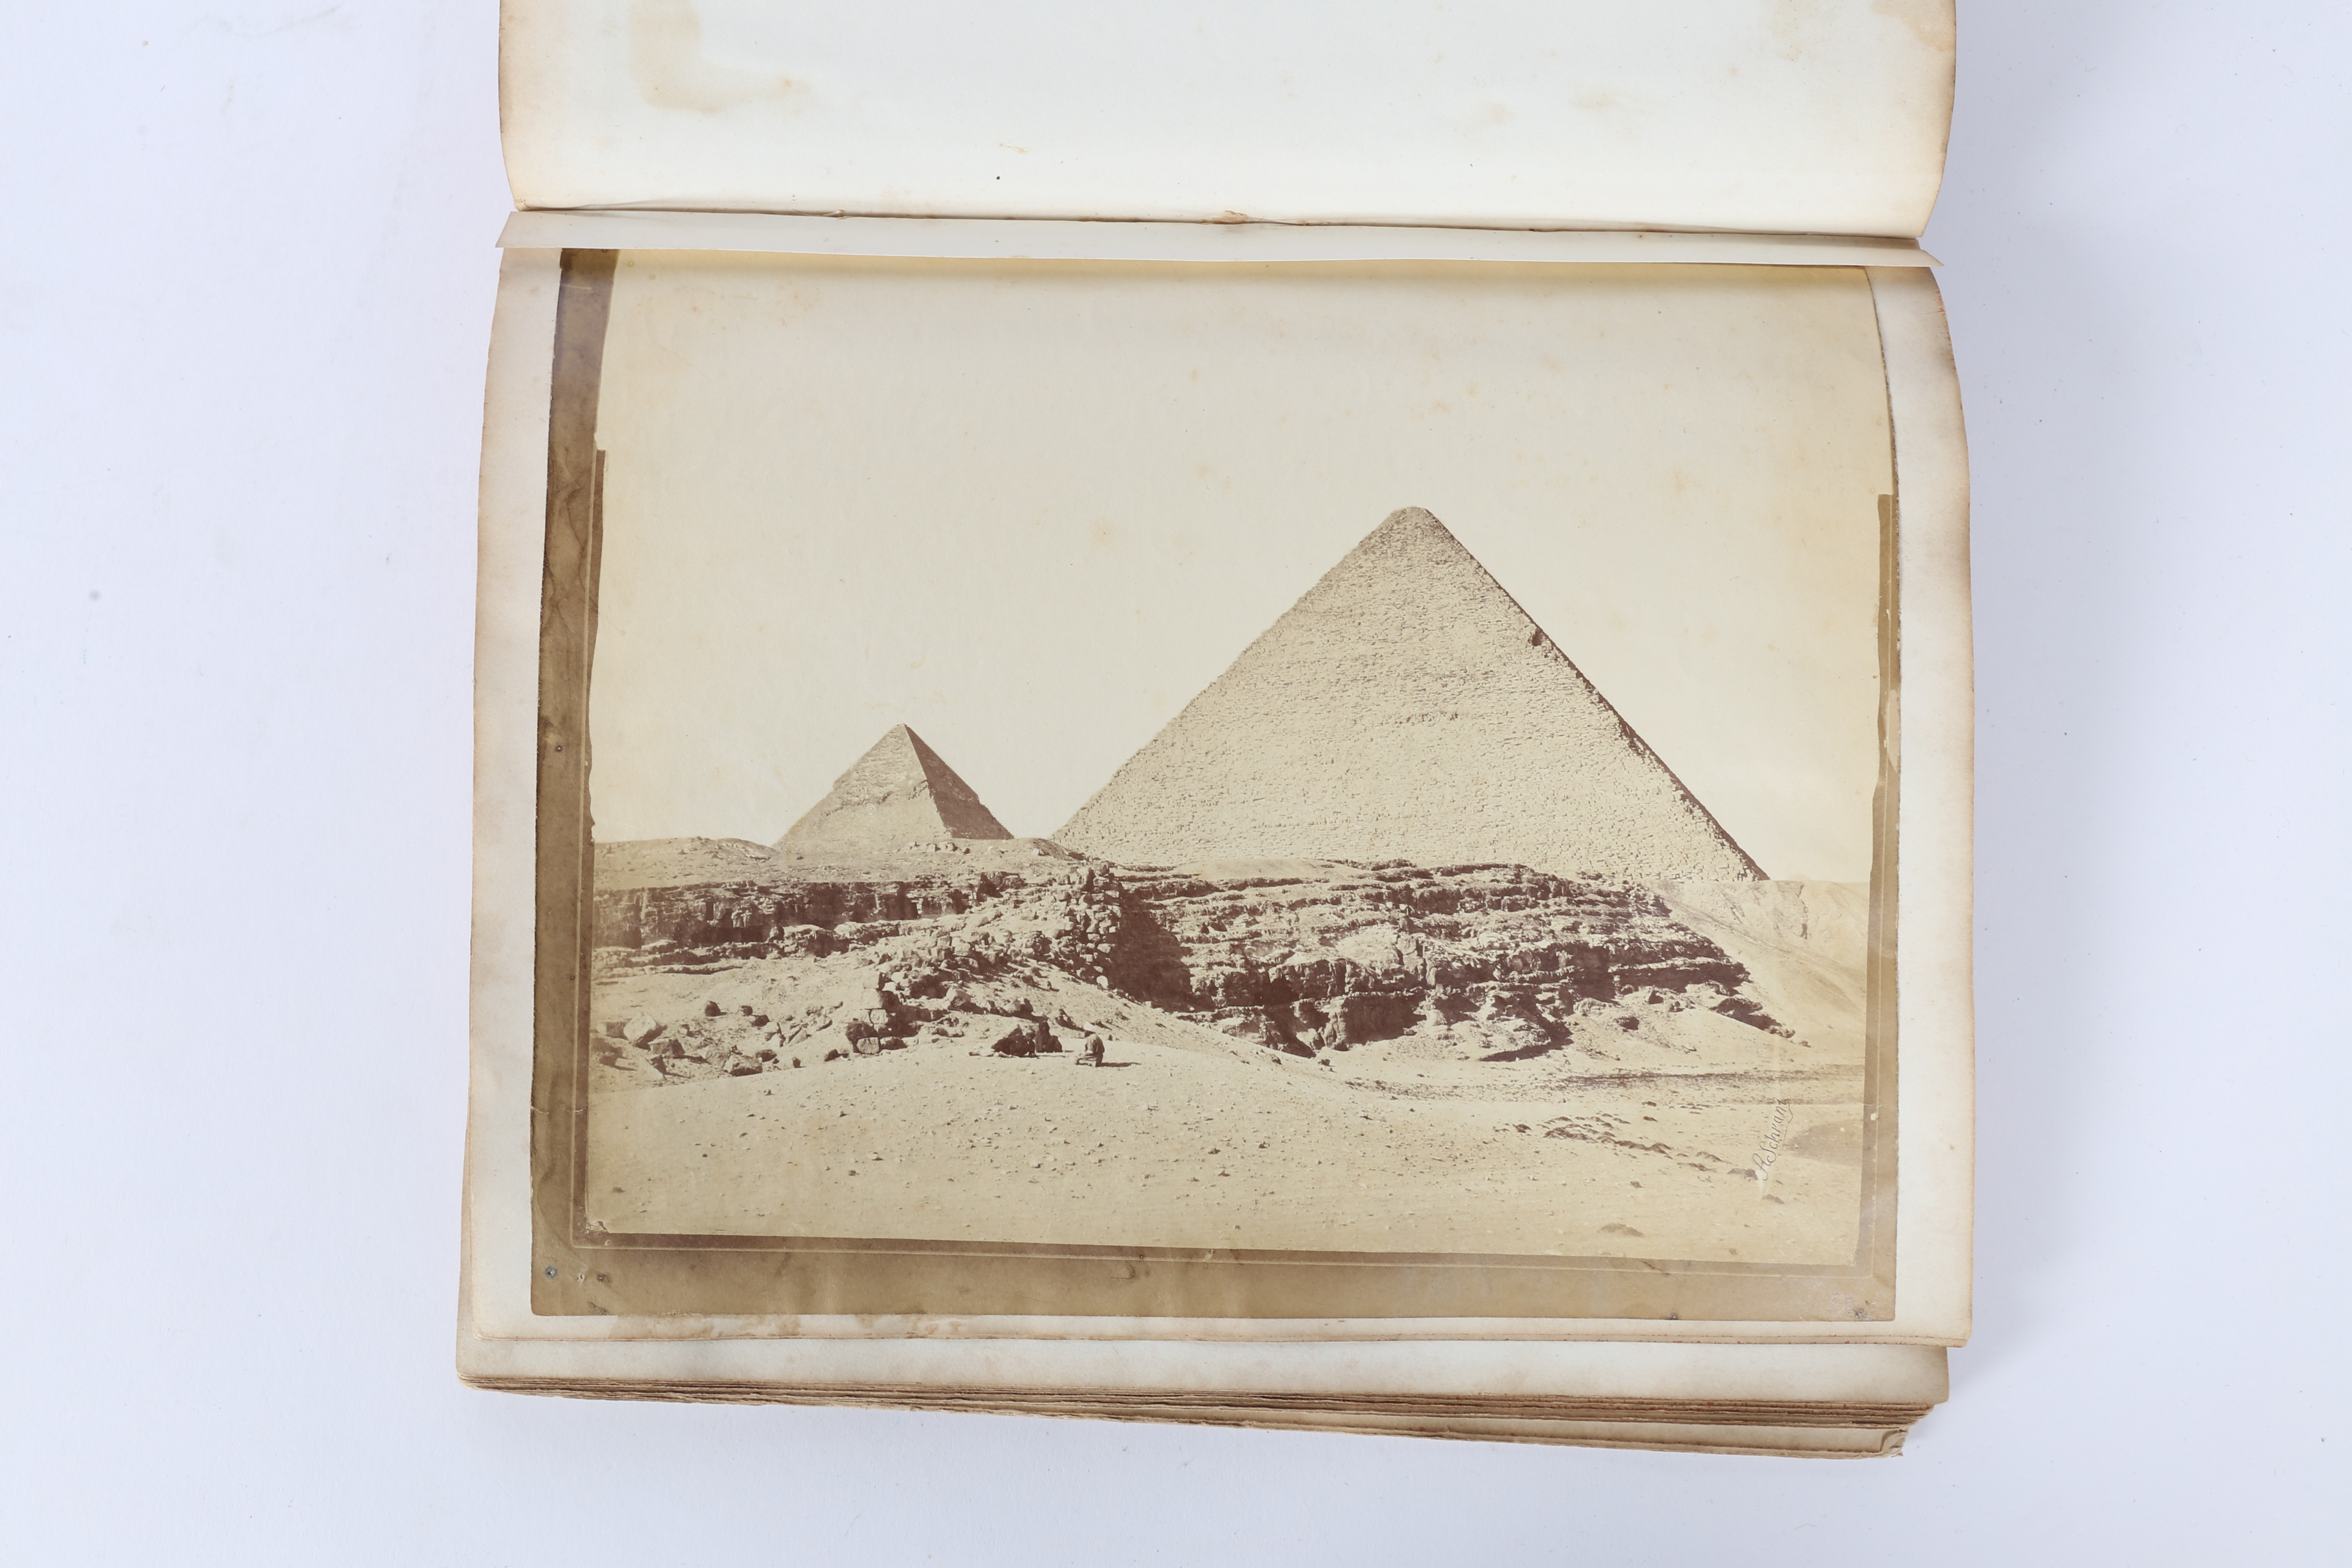 VICTORIAN PHOTOGRAPH ALBUM BELONGING TO GENERAL SIR HARRY JONES GCB DCL, AND HIS WIFE LADY CHARLOTTE - Image 2 of 60